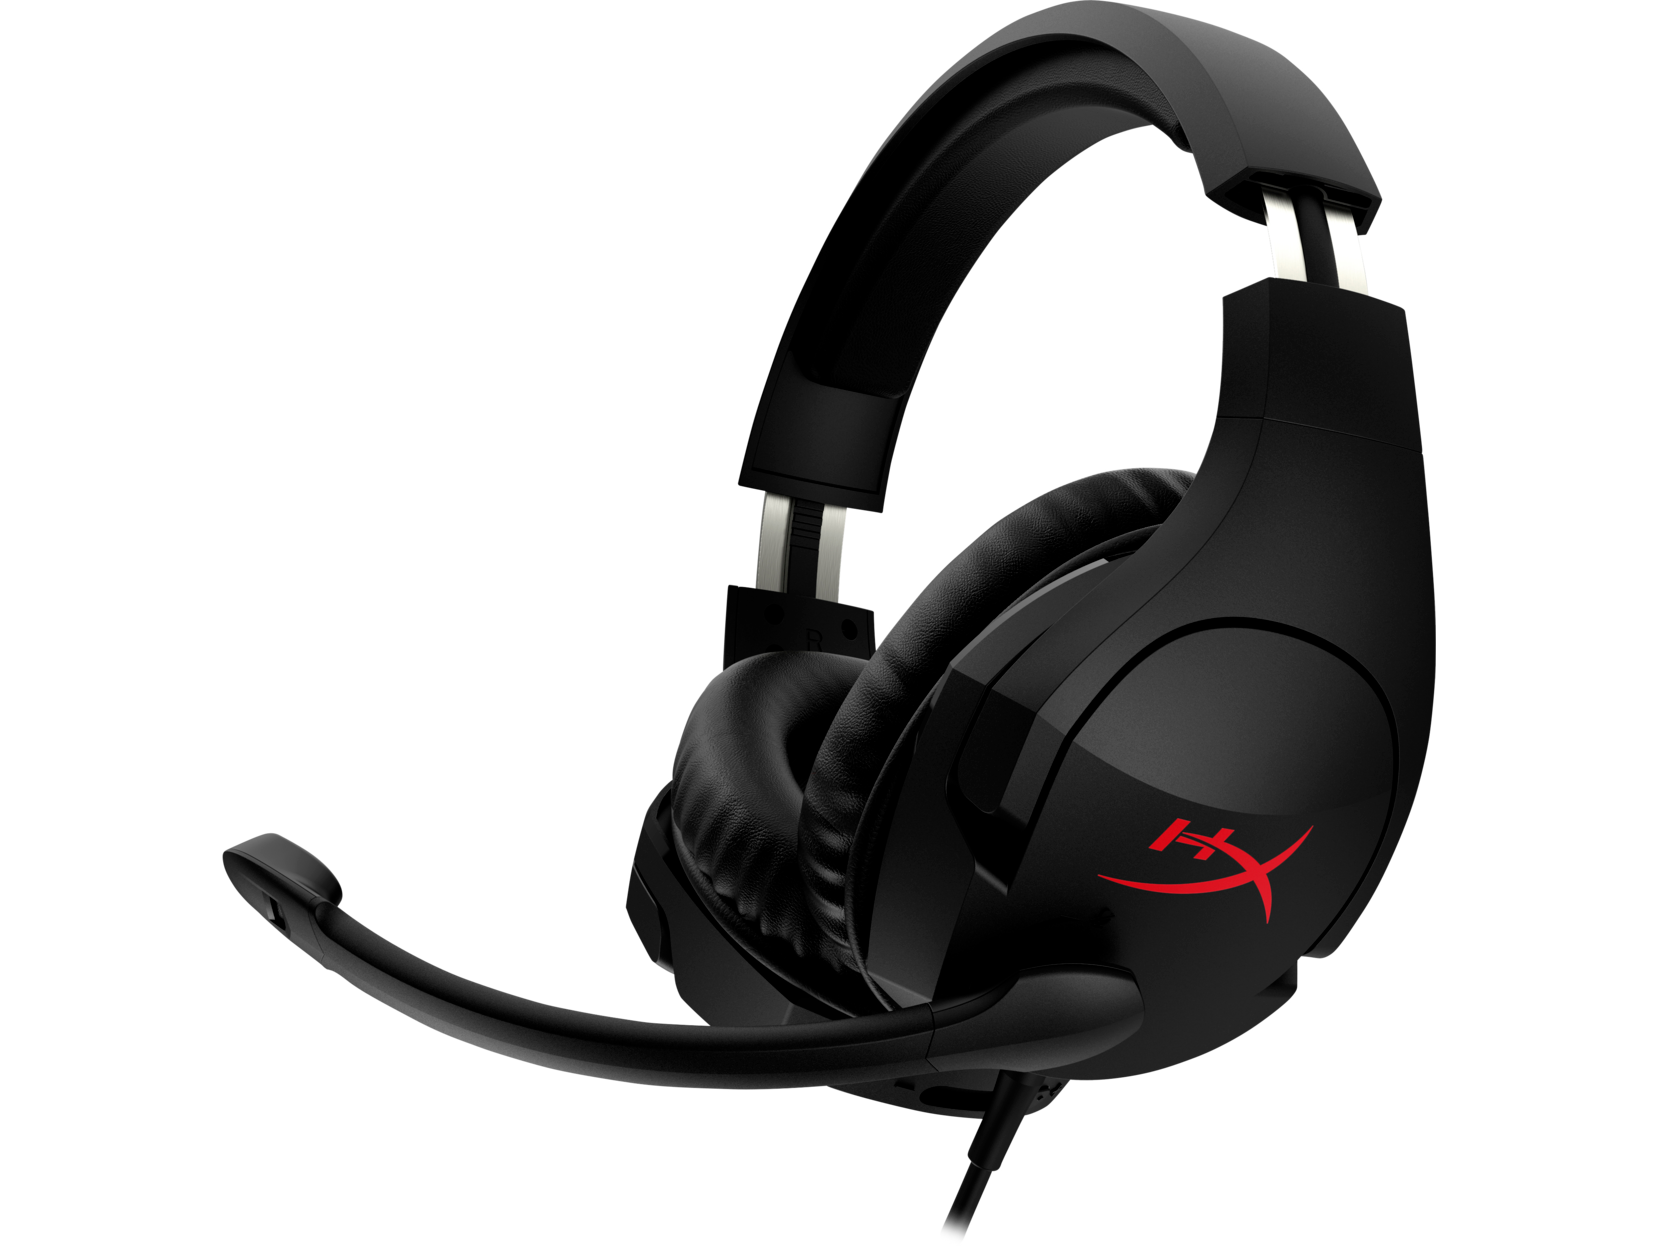 100016438 – HYPERX – CLOUD STINGER – HEADSET – PARA COMPUTER – WIRED.01